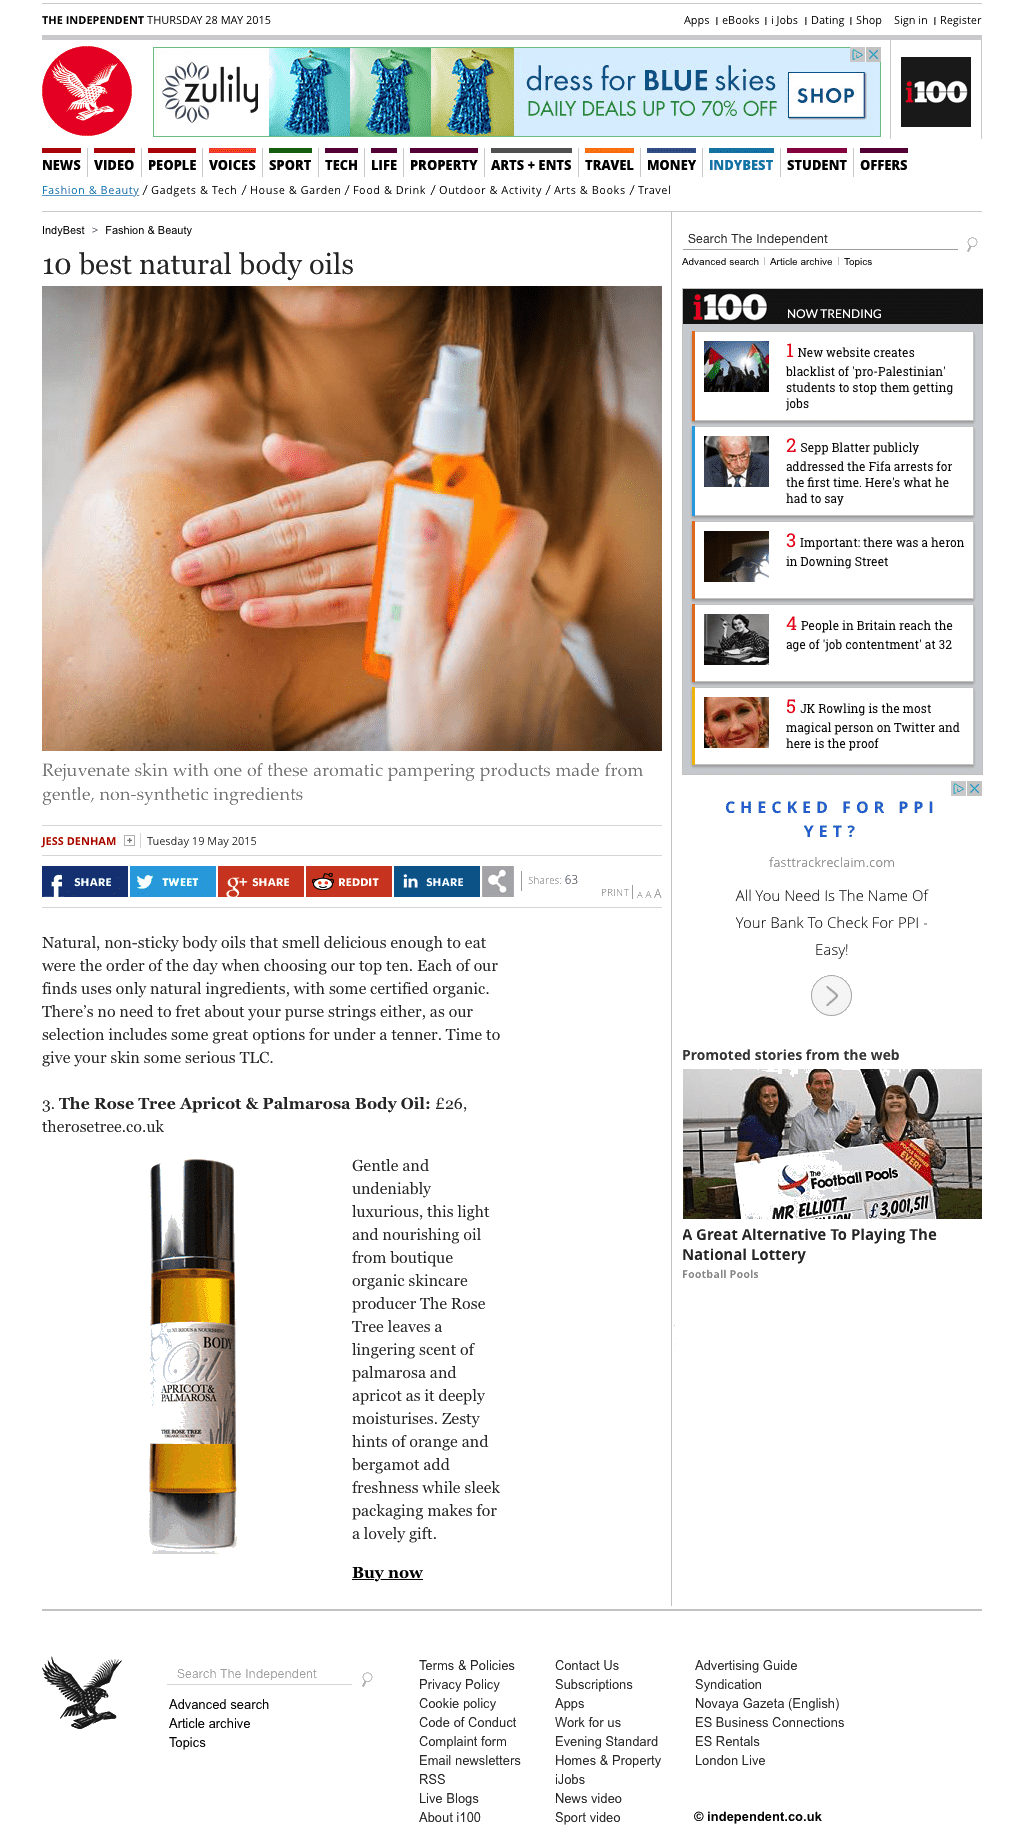 The Independent - 10 Best Natural Body Oils